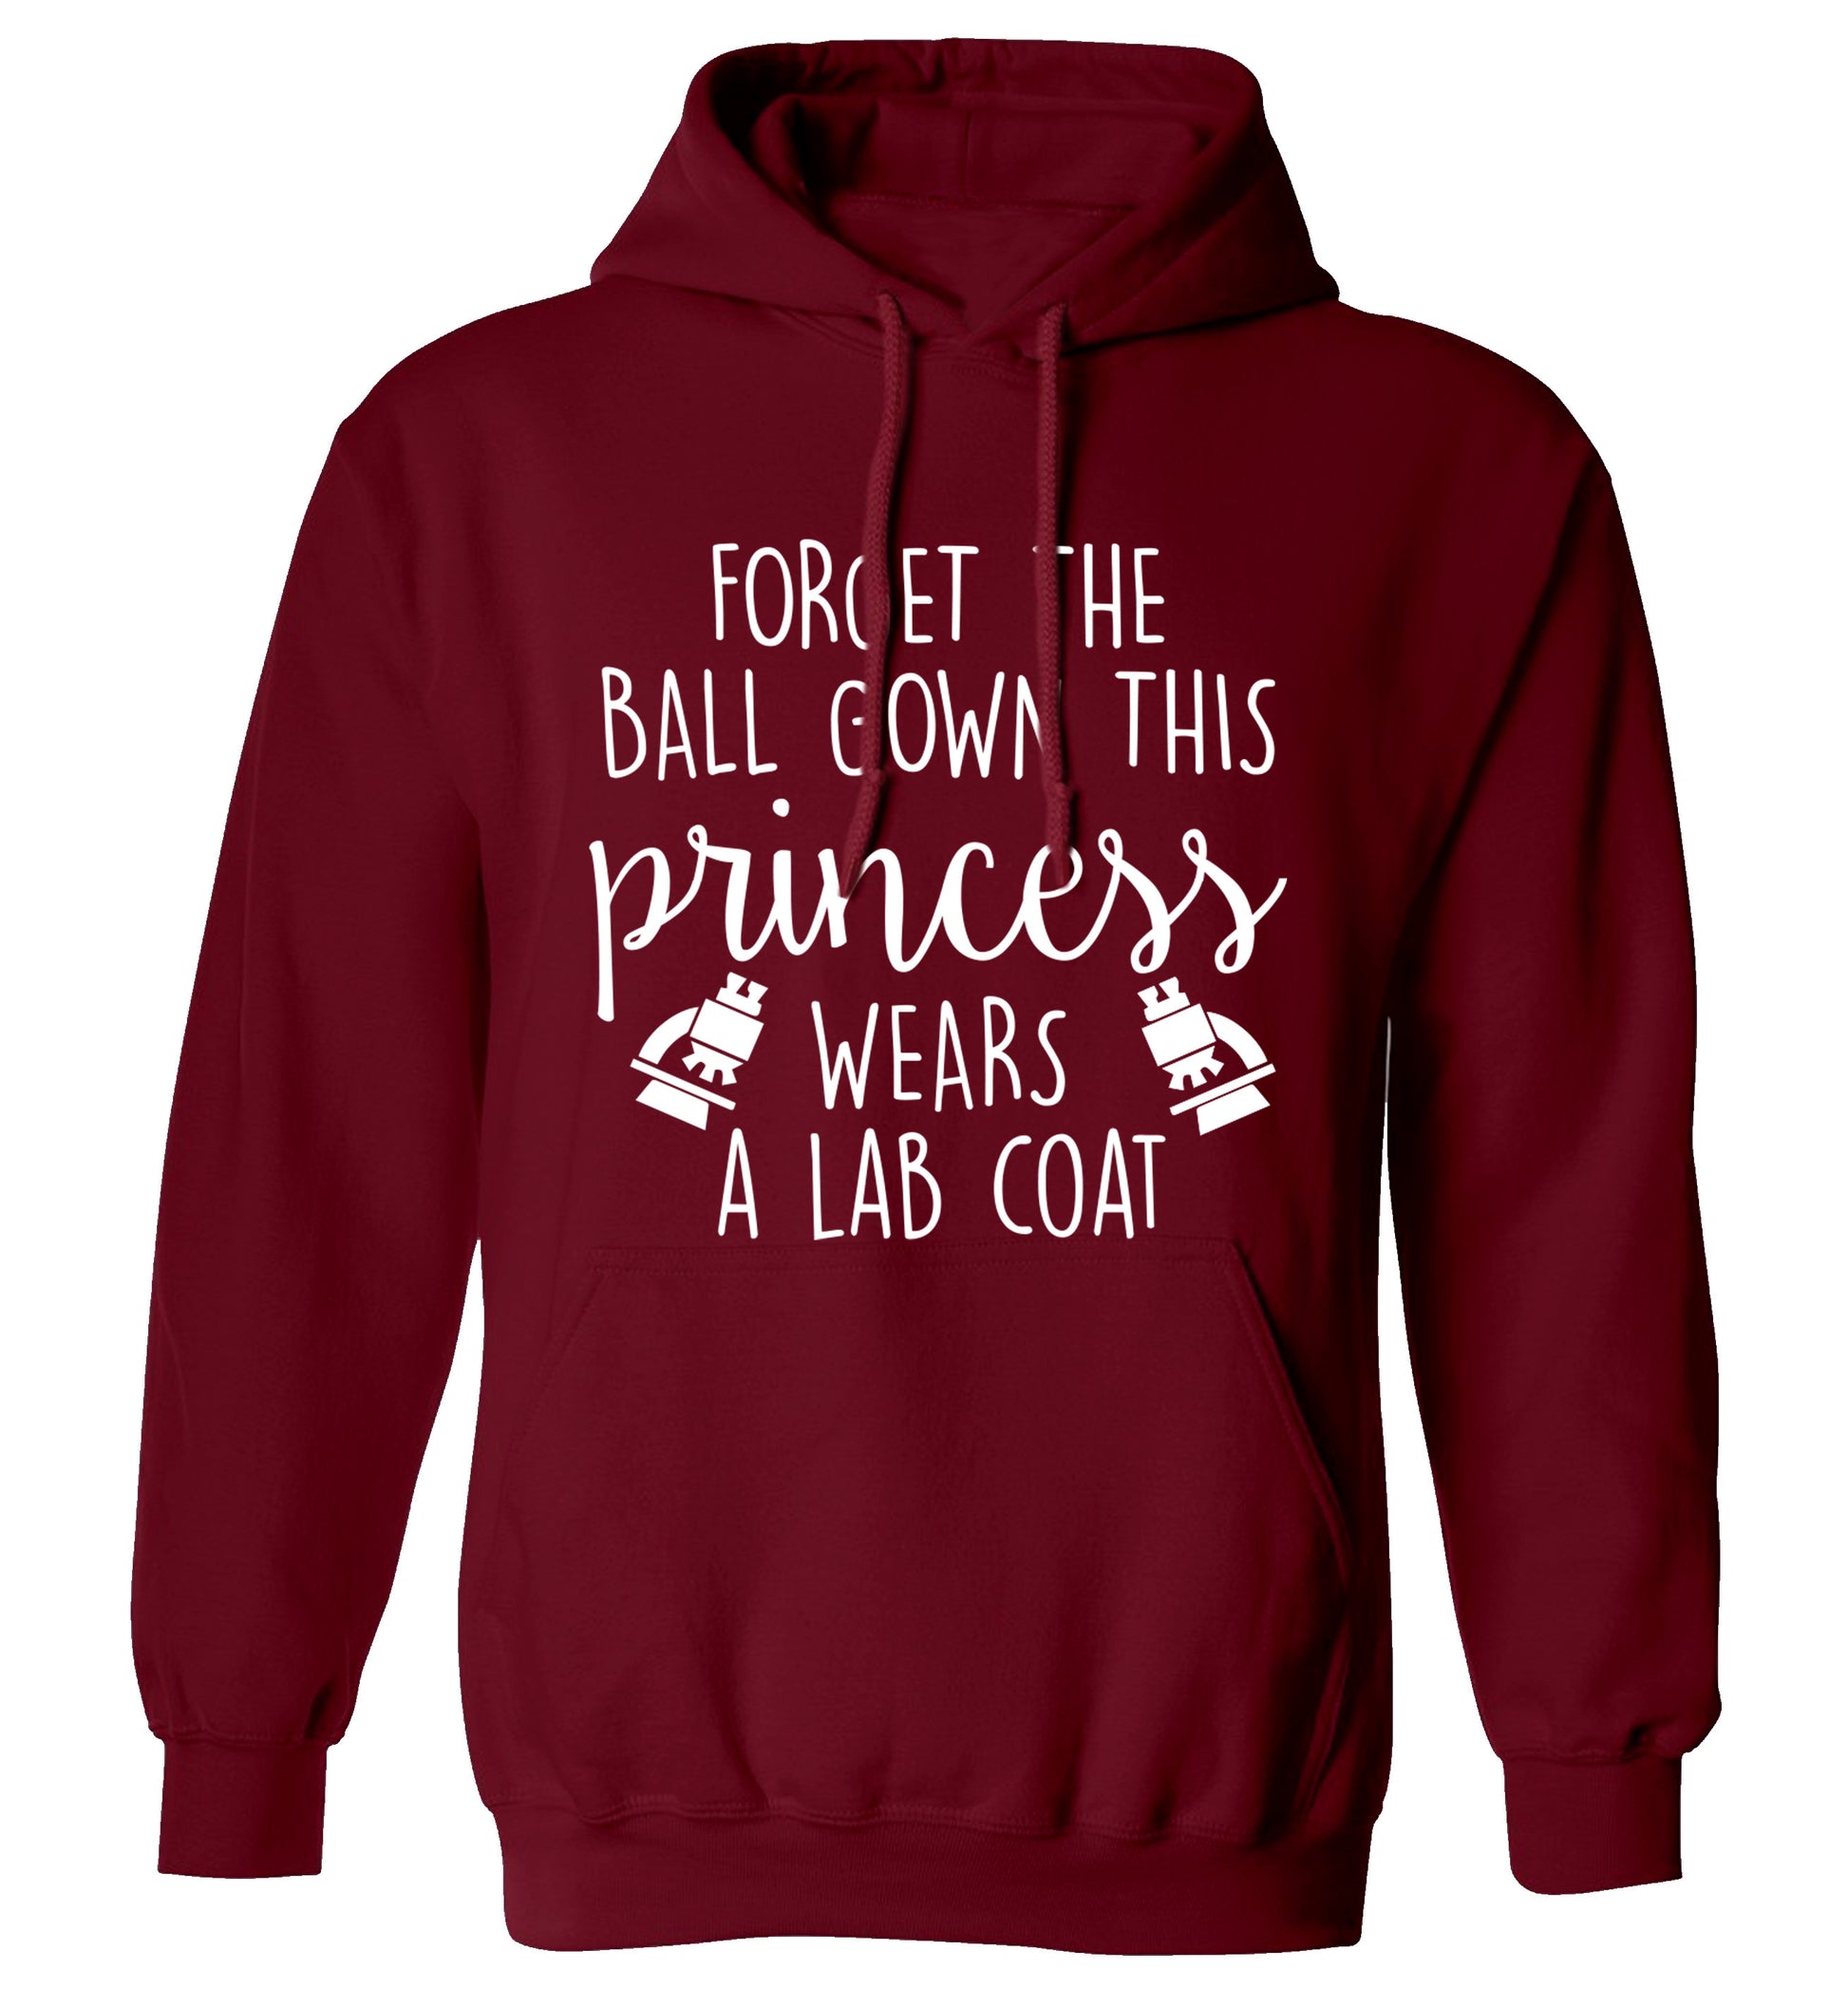 Forget the ball gown this princess wears a lab coat adults unisex maroon hoodie 2XL